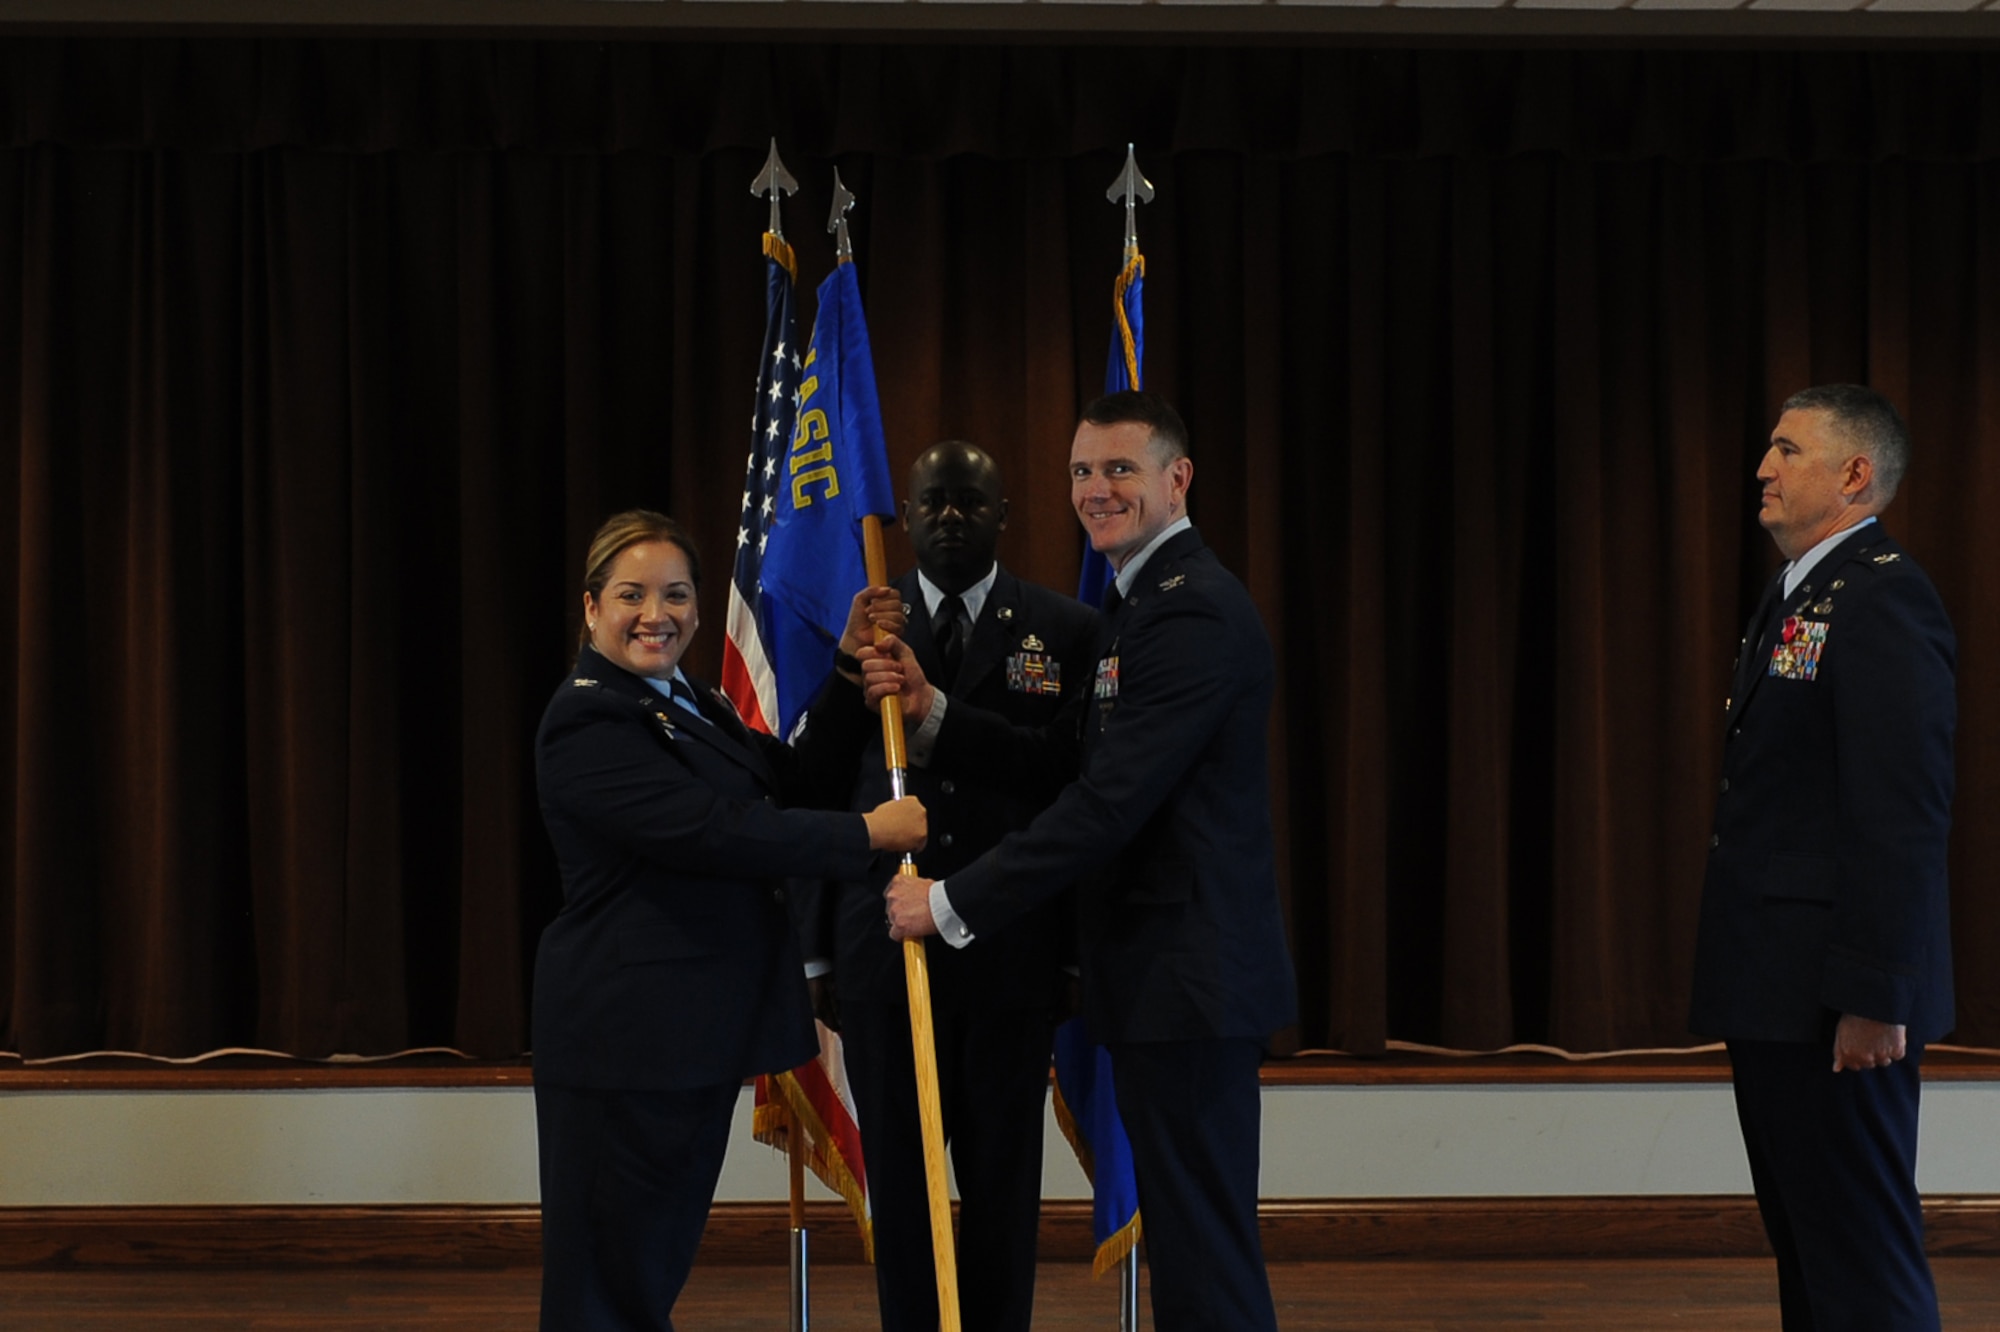 Col. Ariel G. Batungbacal, left, National Air and Space Intelligence Center commander, presents the guidon to Col. Brian McCreary, inbound Global Exploitation Intelligence Group commander, during the group’s change of command ceremony at Wright-Patterson Air Force Base, Ohio, June 30, 2023. Earlier in the ceremony, Batungbacal, gave opening remarks where she both welcomed McCreary and expressed appreciation for outbound commander Col. Kenneth Stremmel, thanking him for his contributions to national security. (U.S. Air Force photo by Senior Airman Kendall Stuckman)